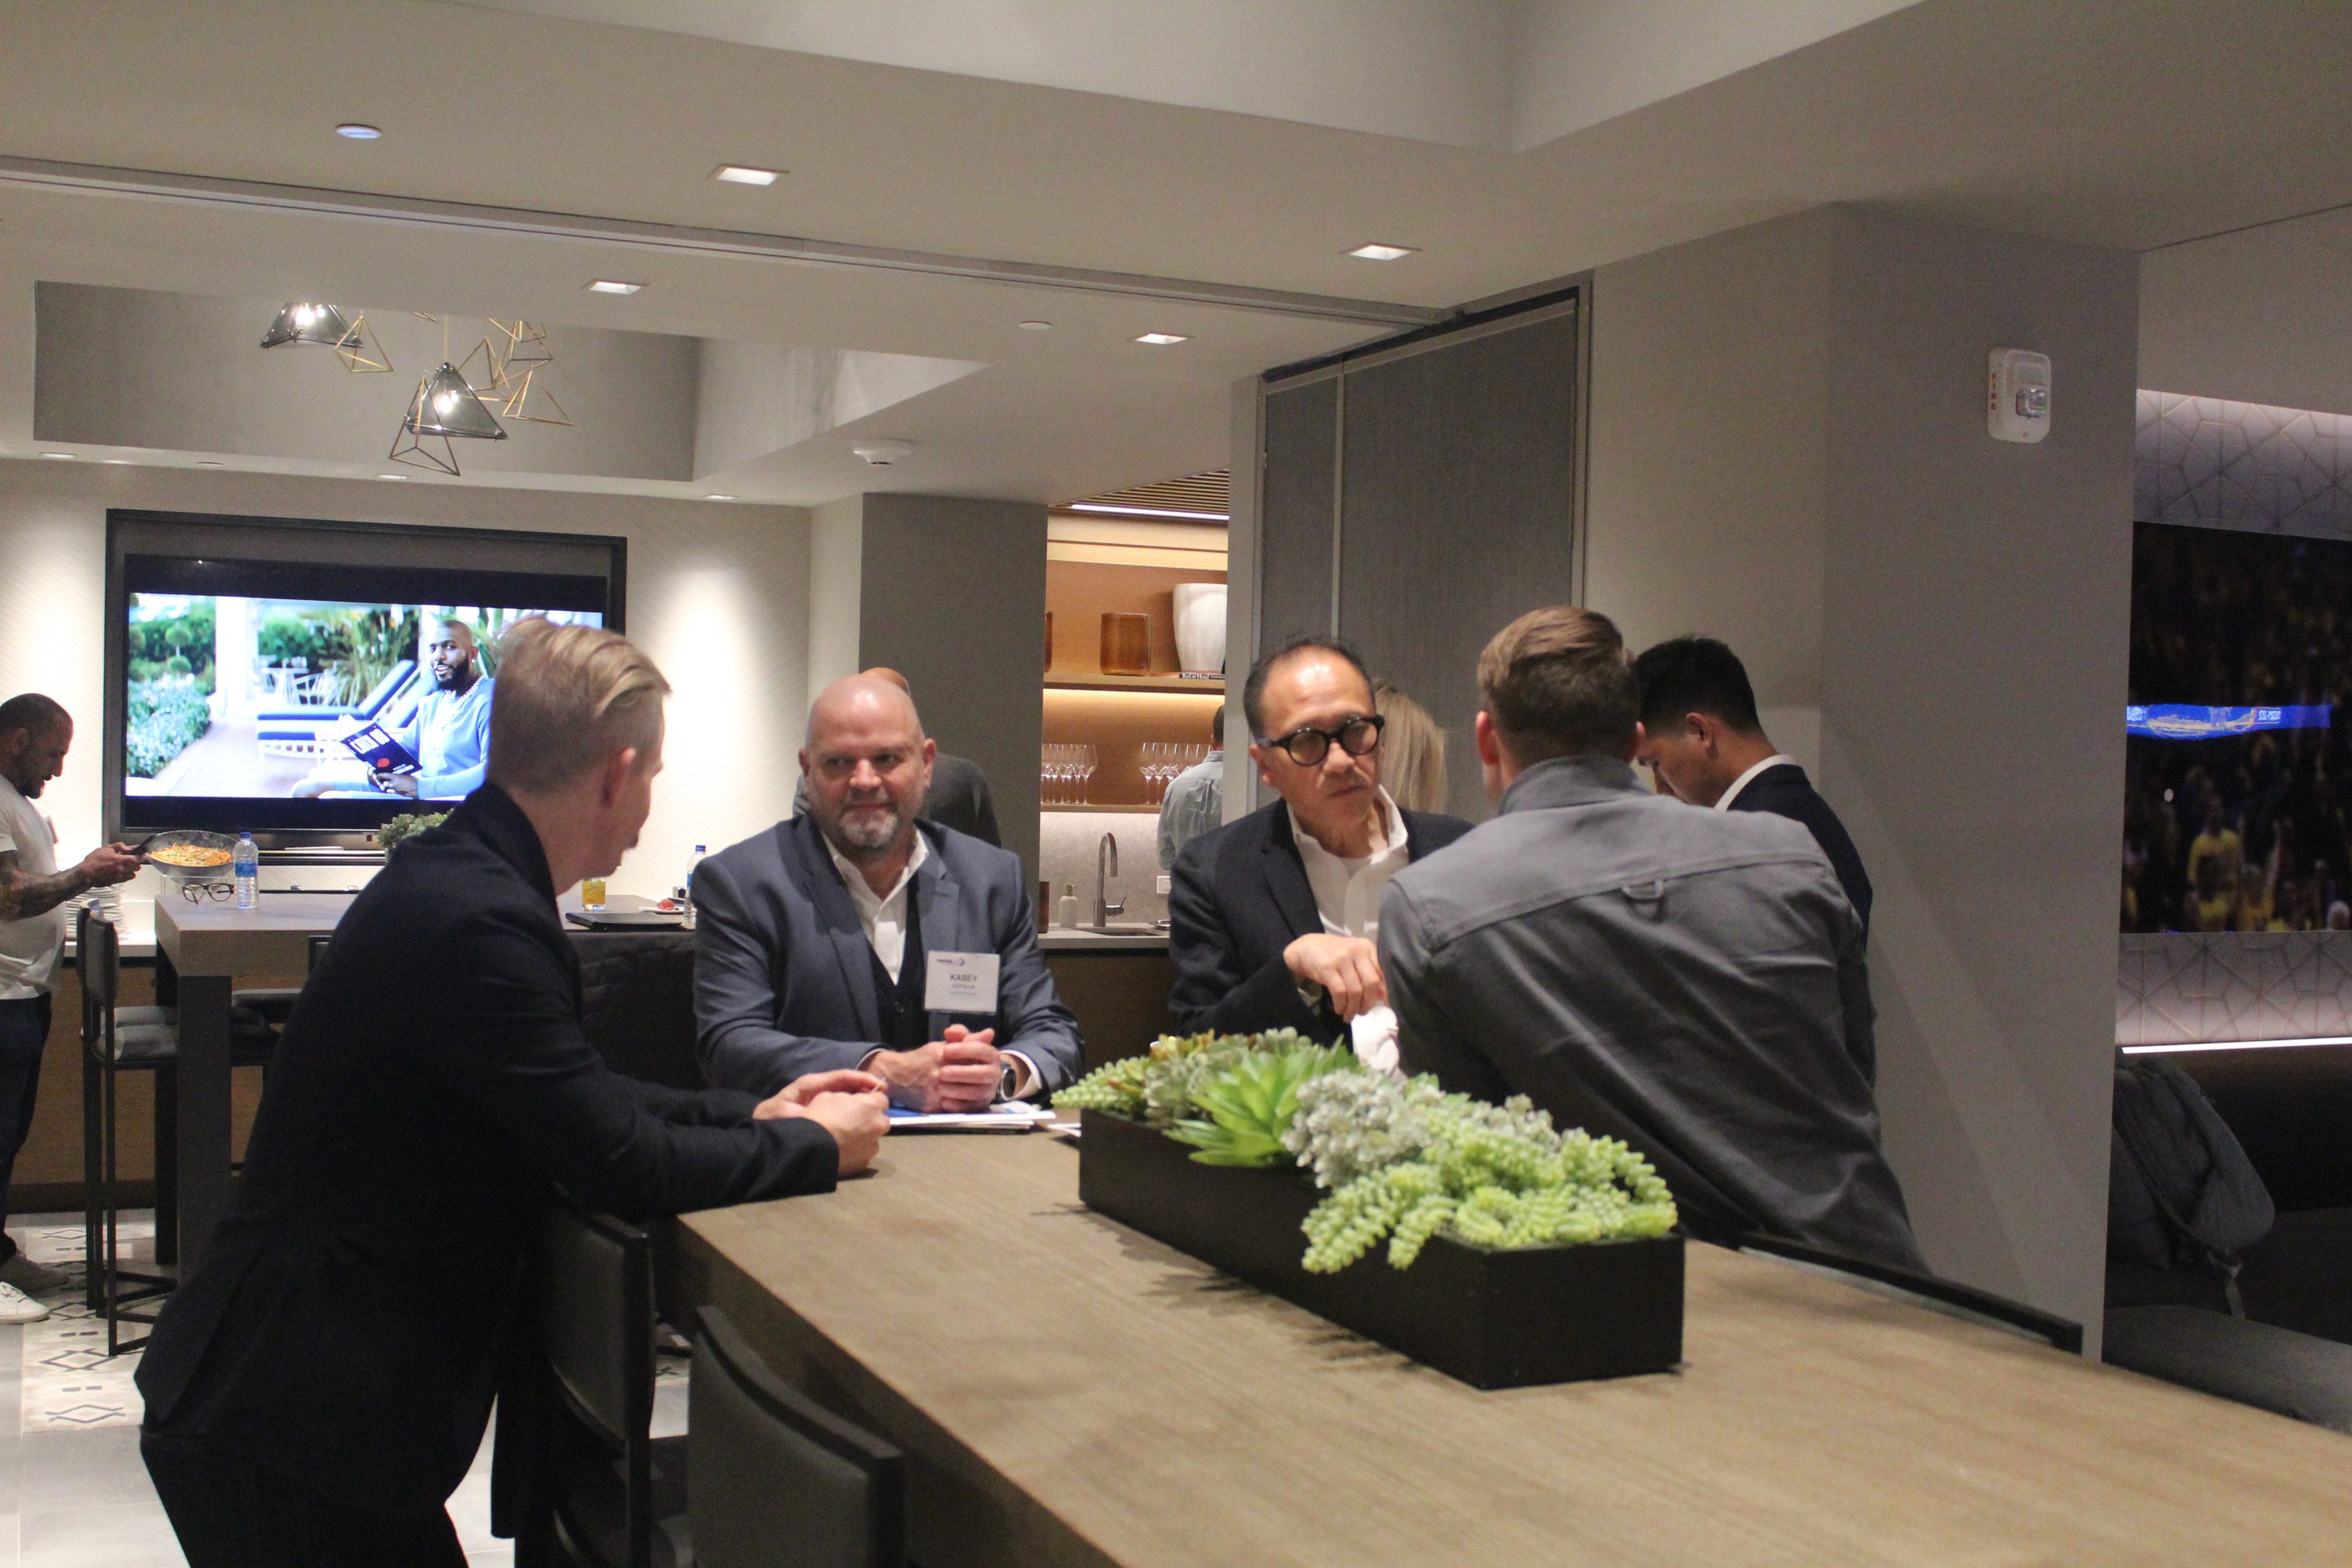 Attendees enjoy the suite at the Chase Center in San Francisco for the Warriors vs Grizzlies basketball game.